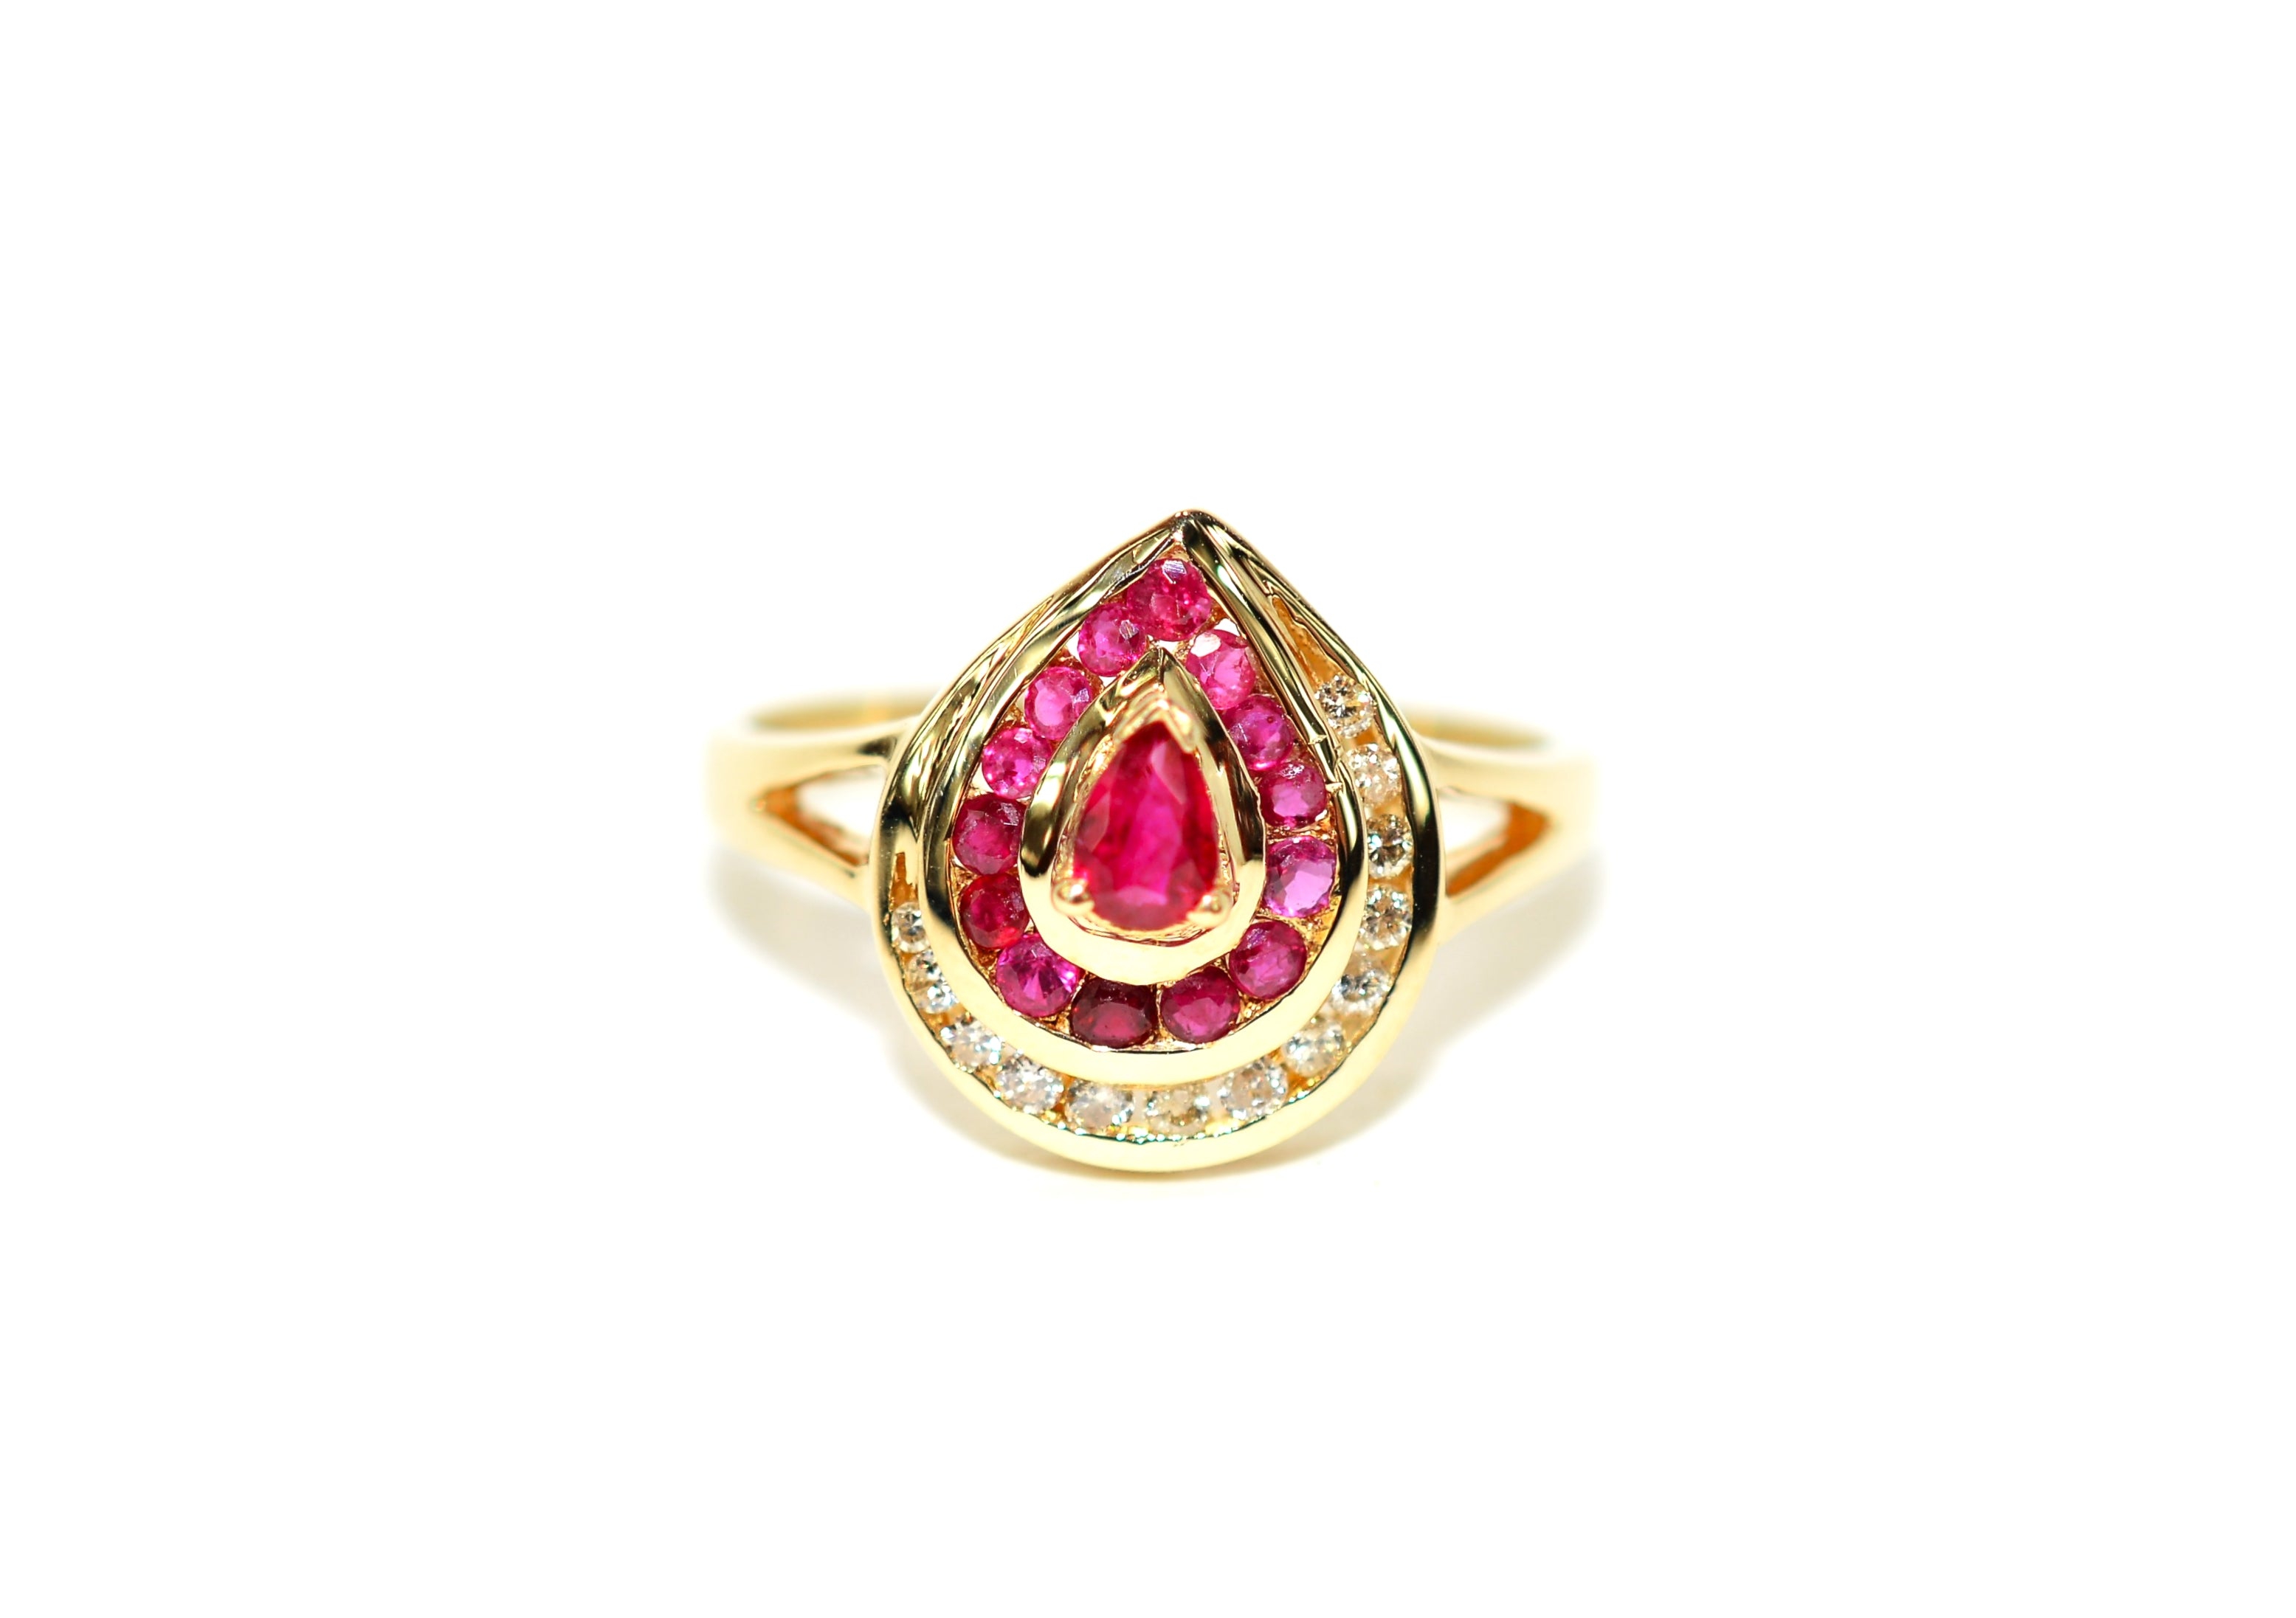 Natural Ruby & Diamond Ring 14K Solid Gold .71tcw Ruby Ring Cluster Ring Gemstone Ring Birthstone Ring Estate Jewelry Vintage Jewellery